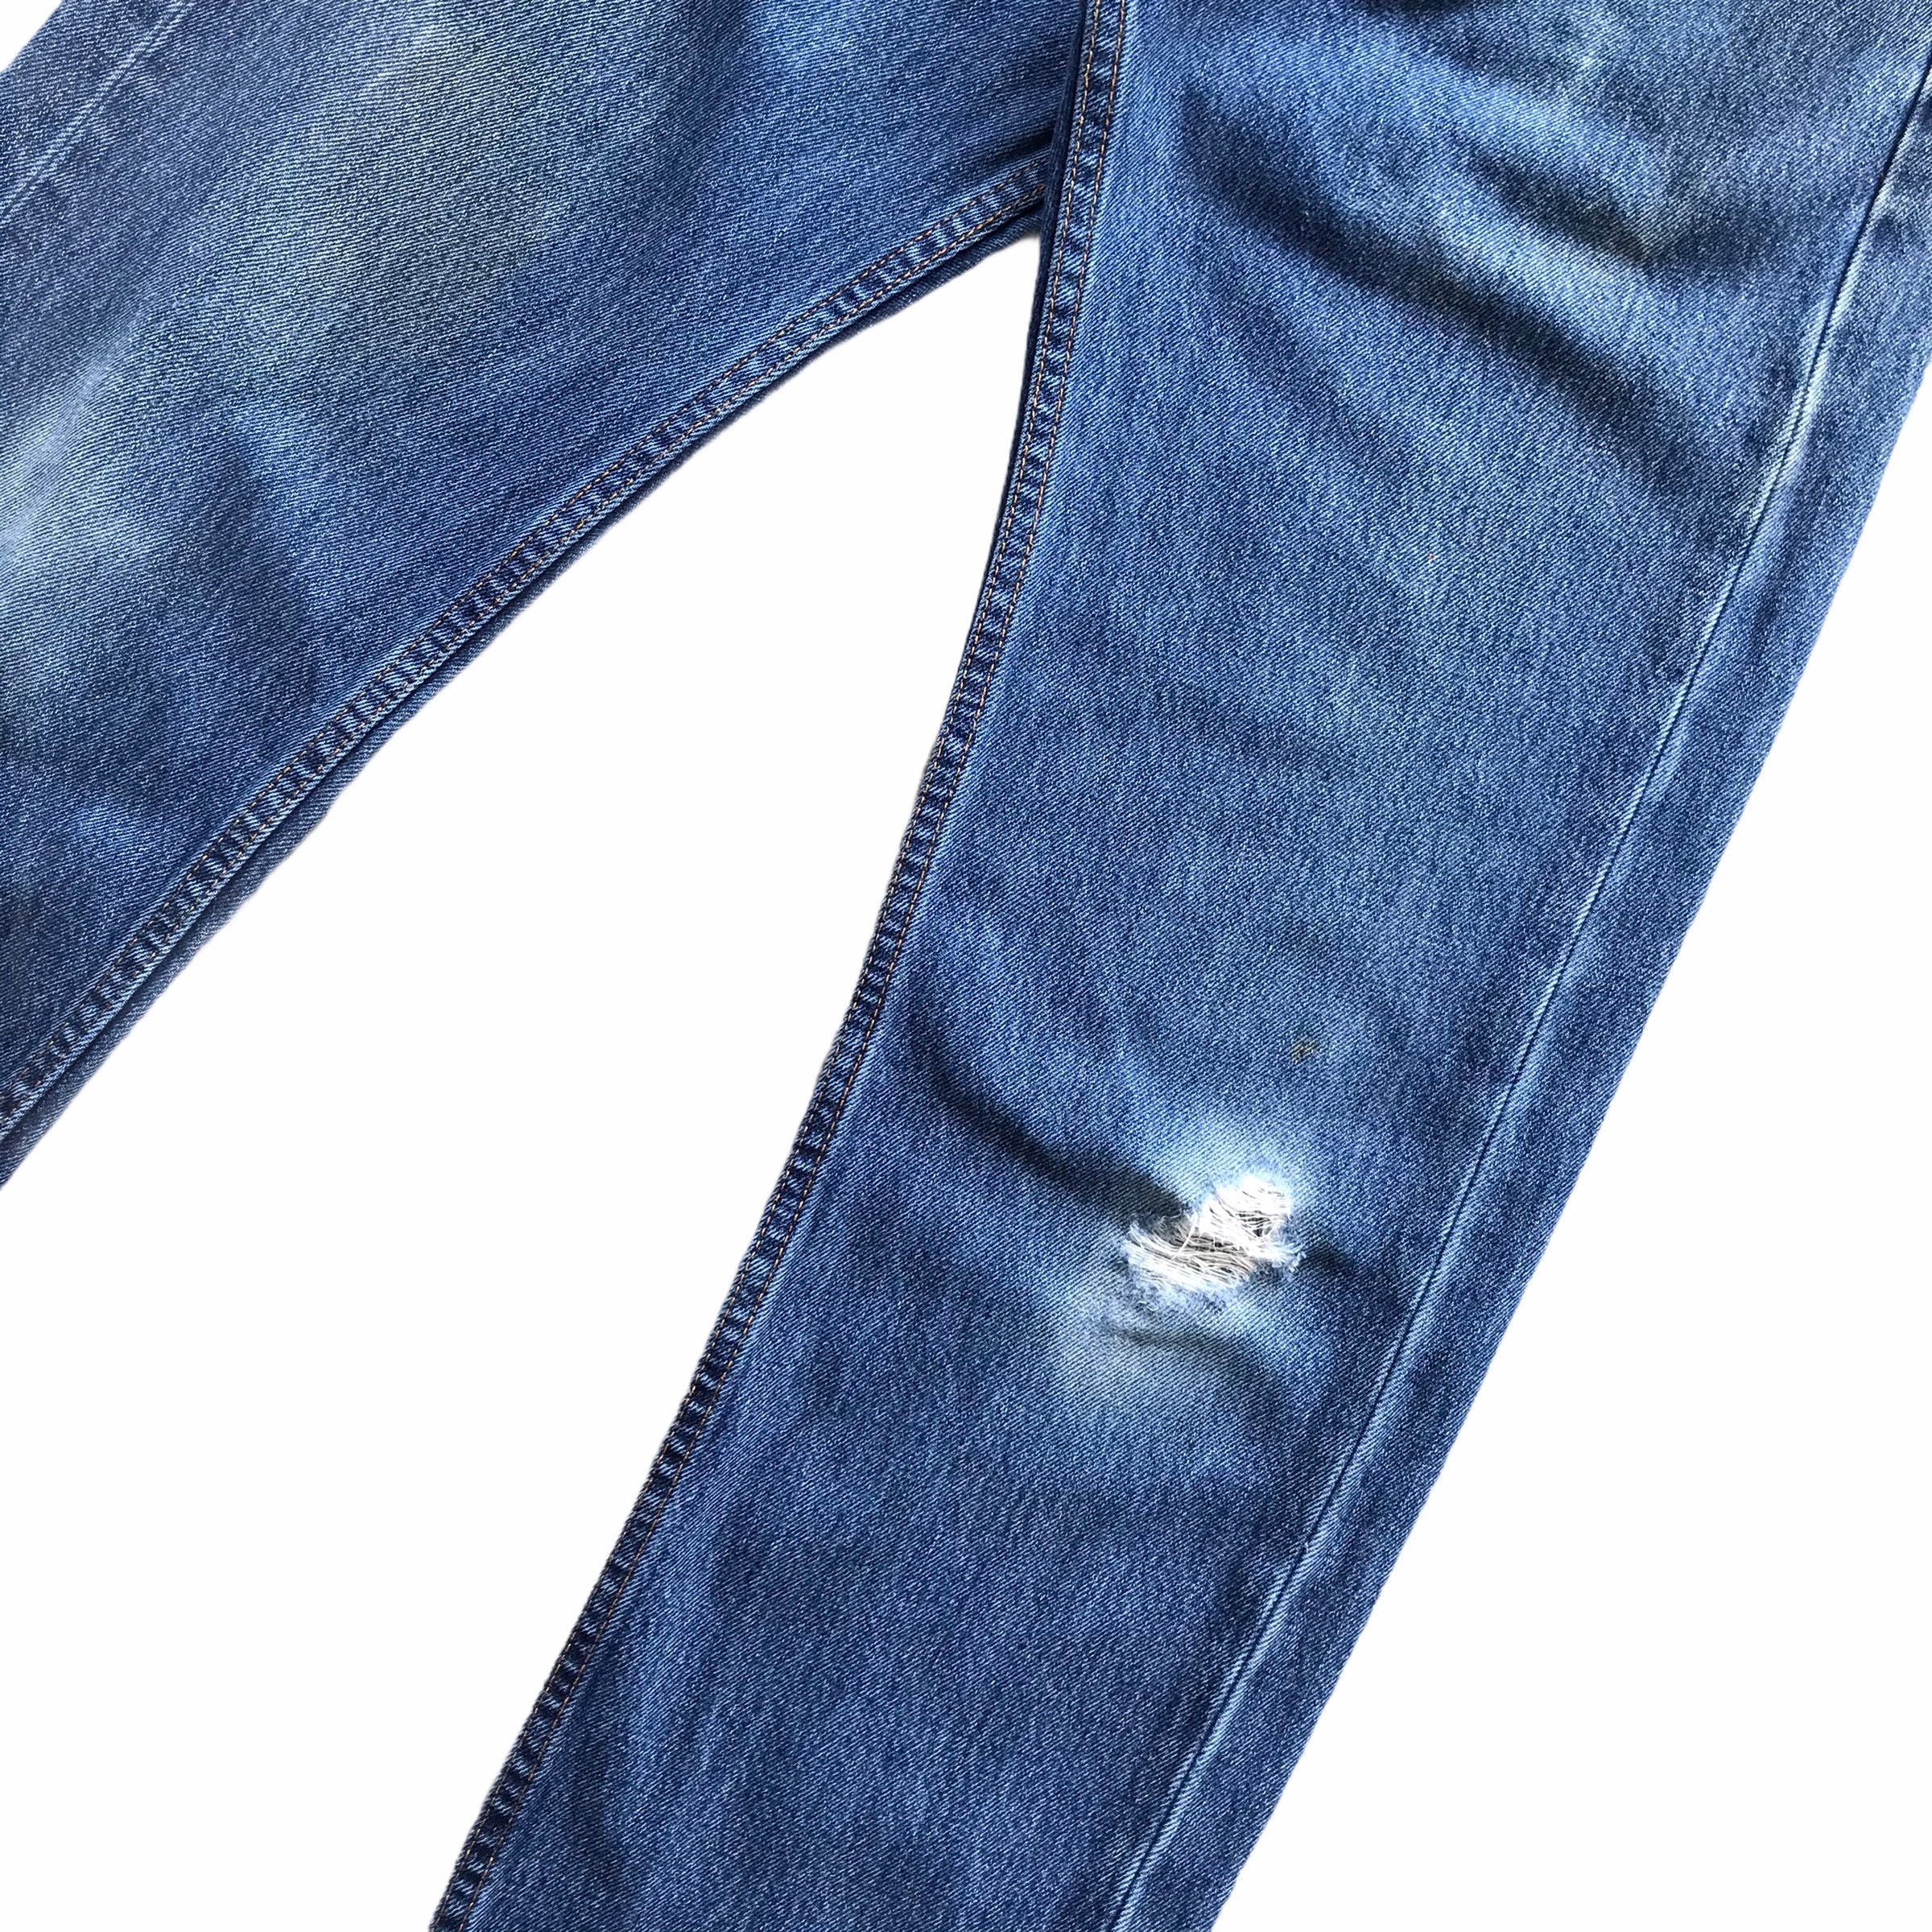 Vintage 90s Levis 505 Relaxed Fit Distressed Denim Blue Faded - Etsy